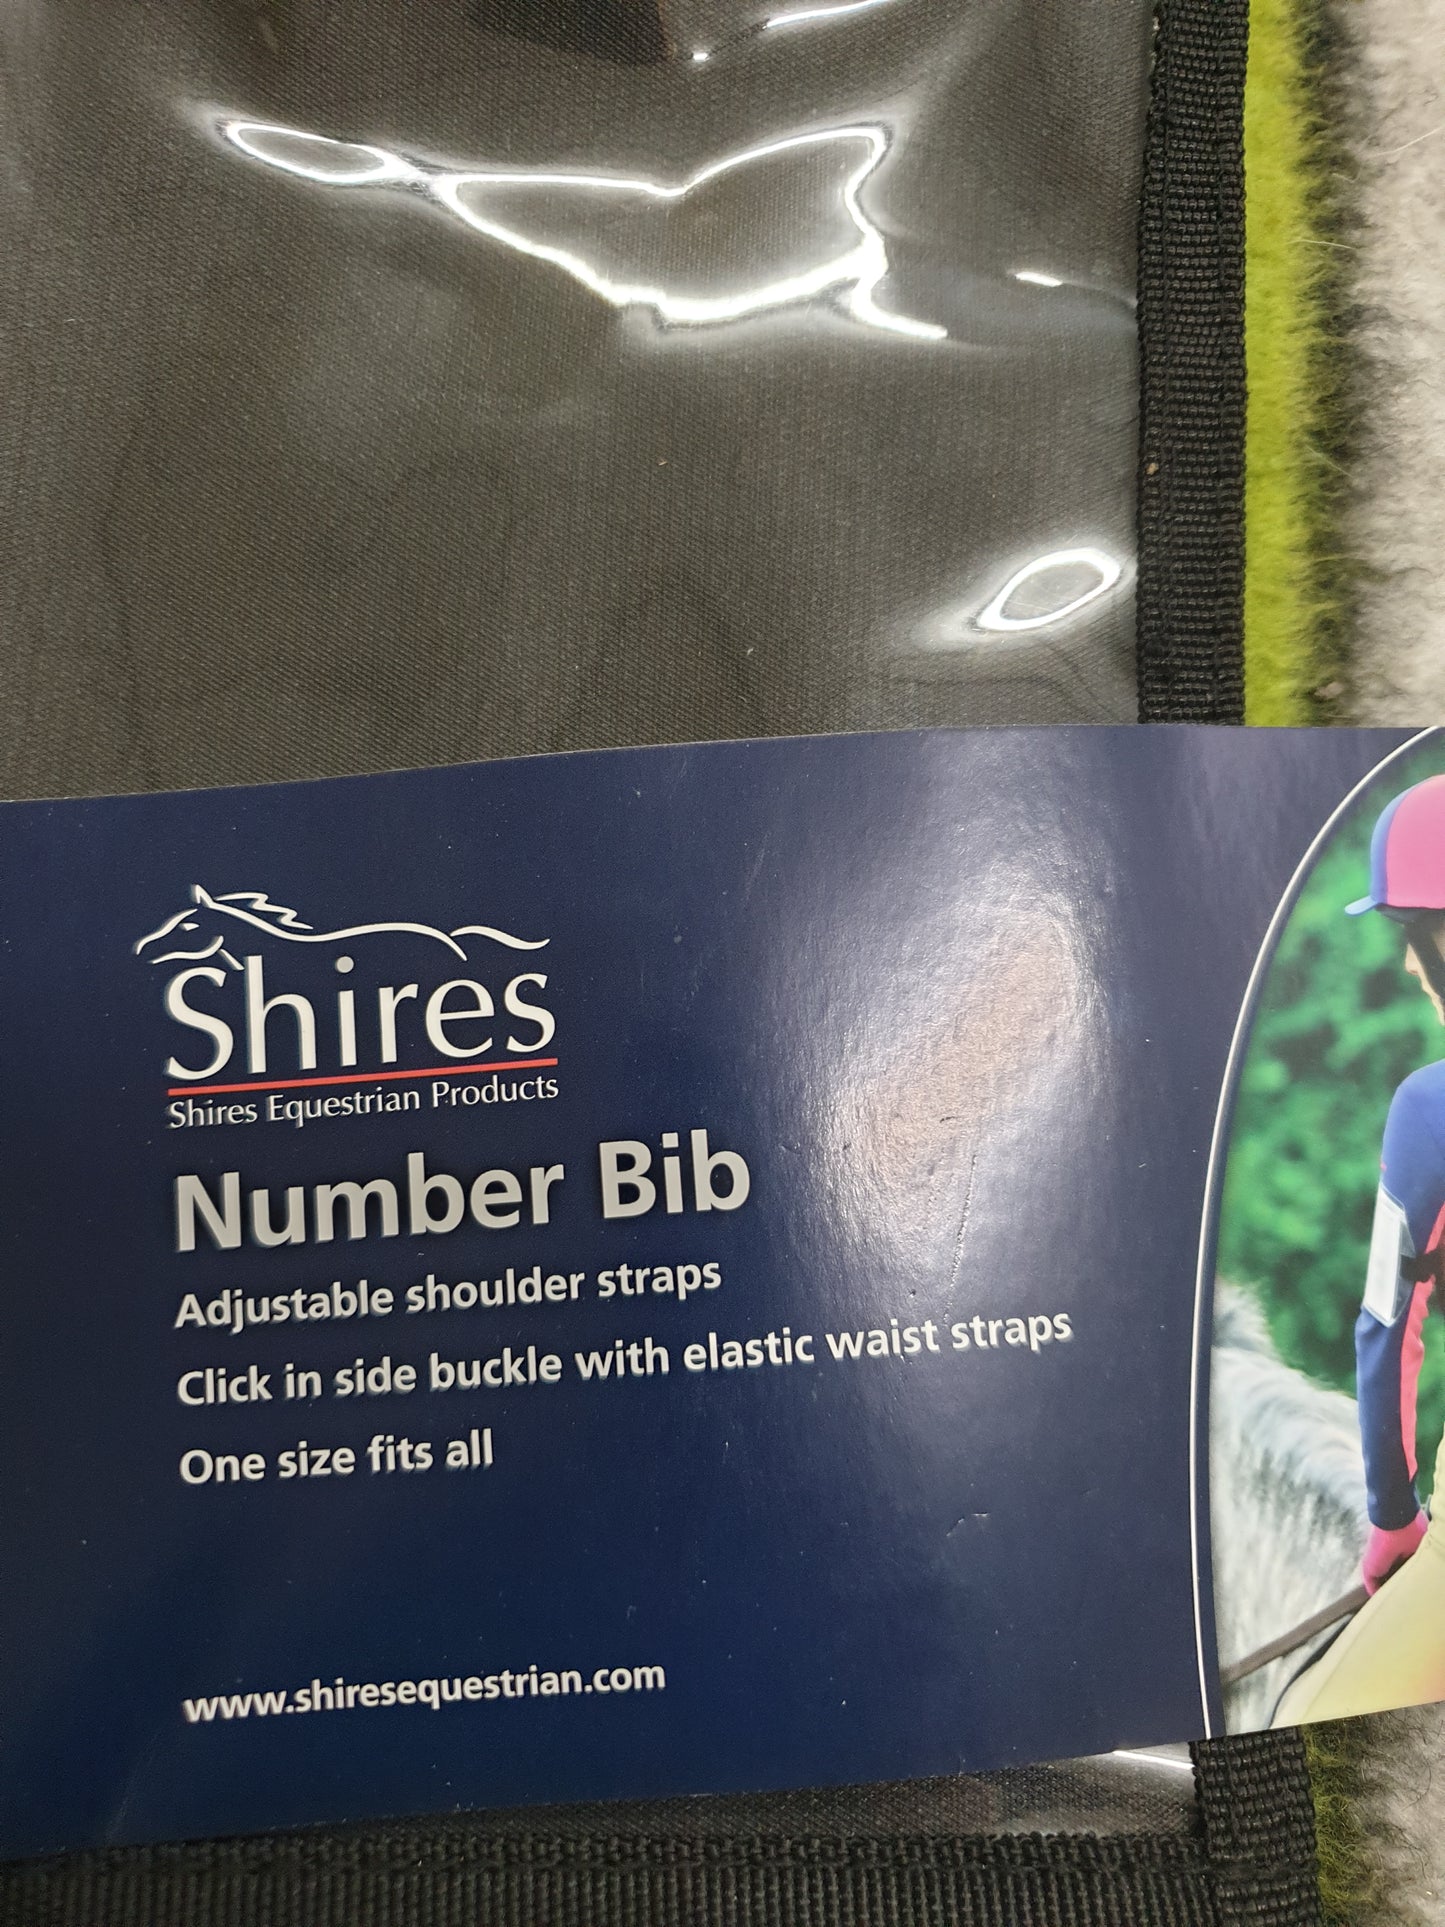 NEW shires number bib, one size fits all, black FREE POSTAGE 🟢